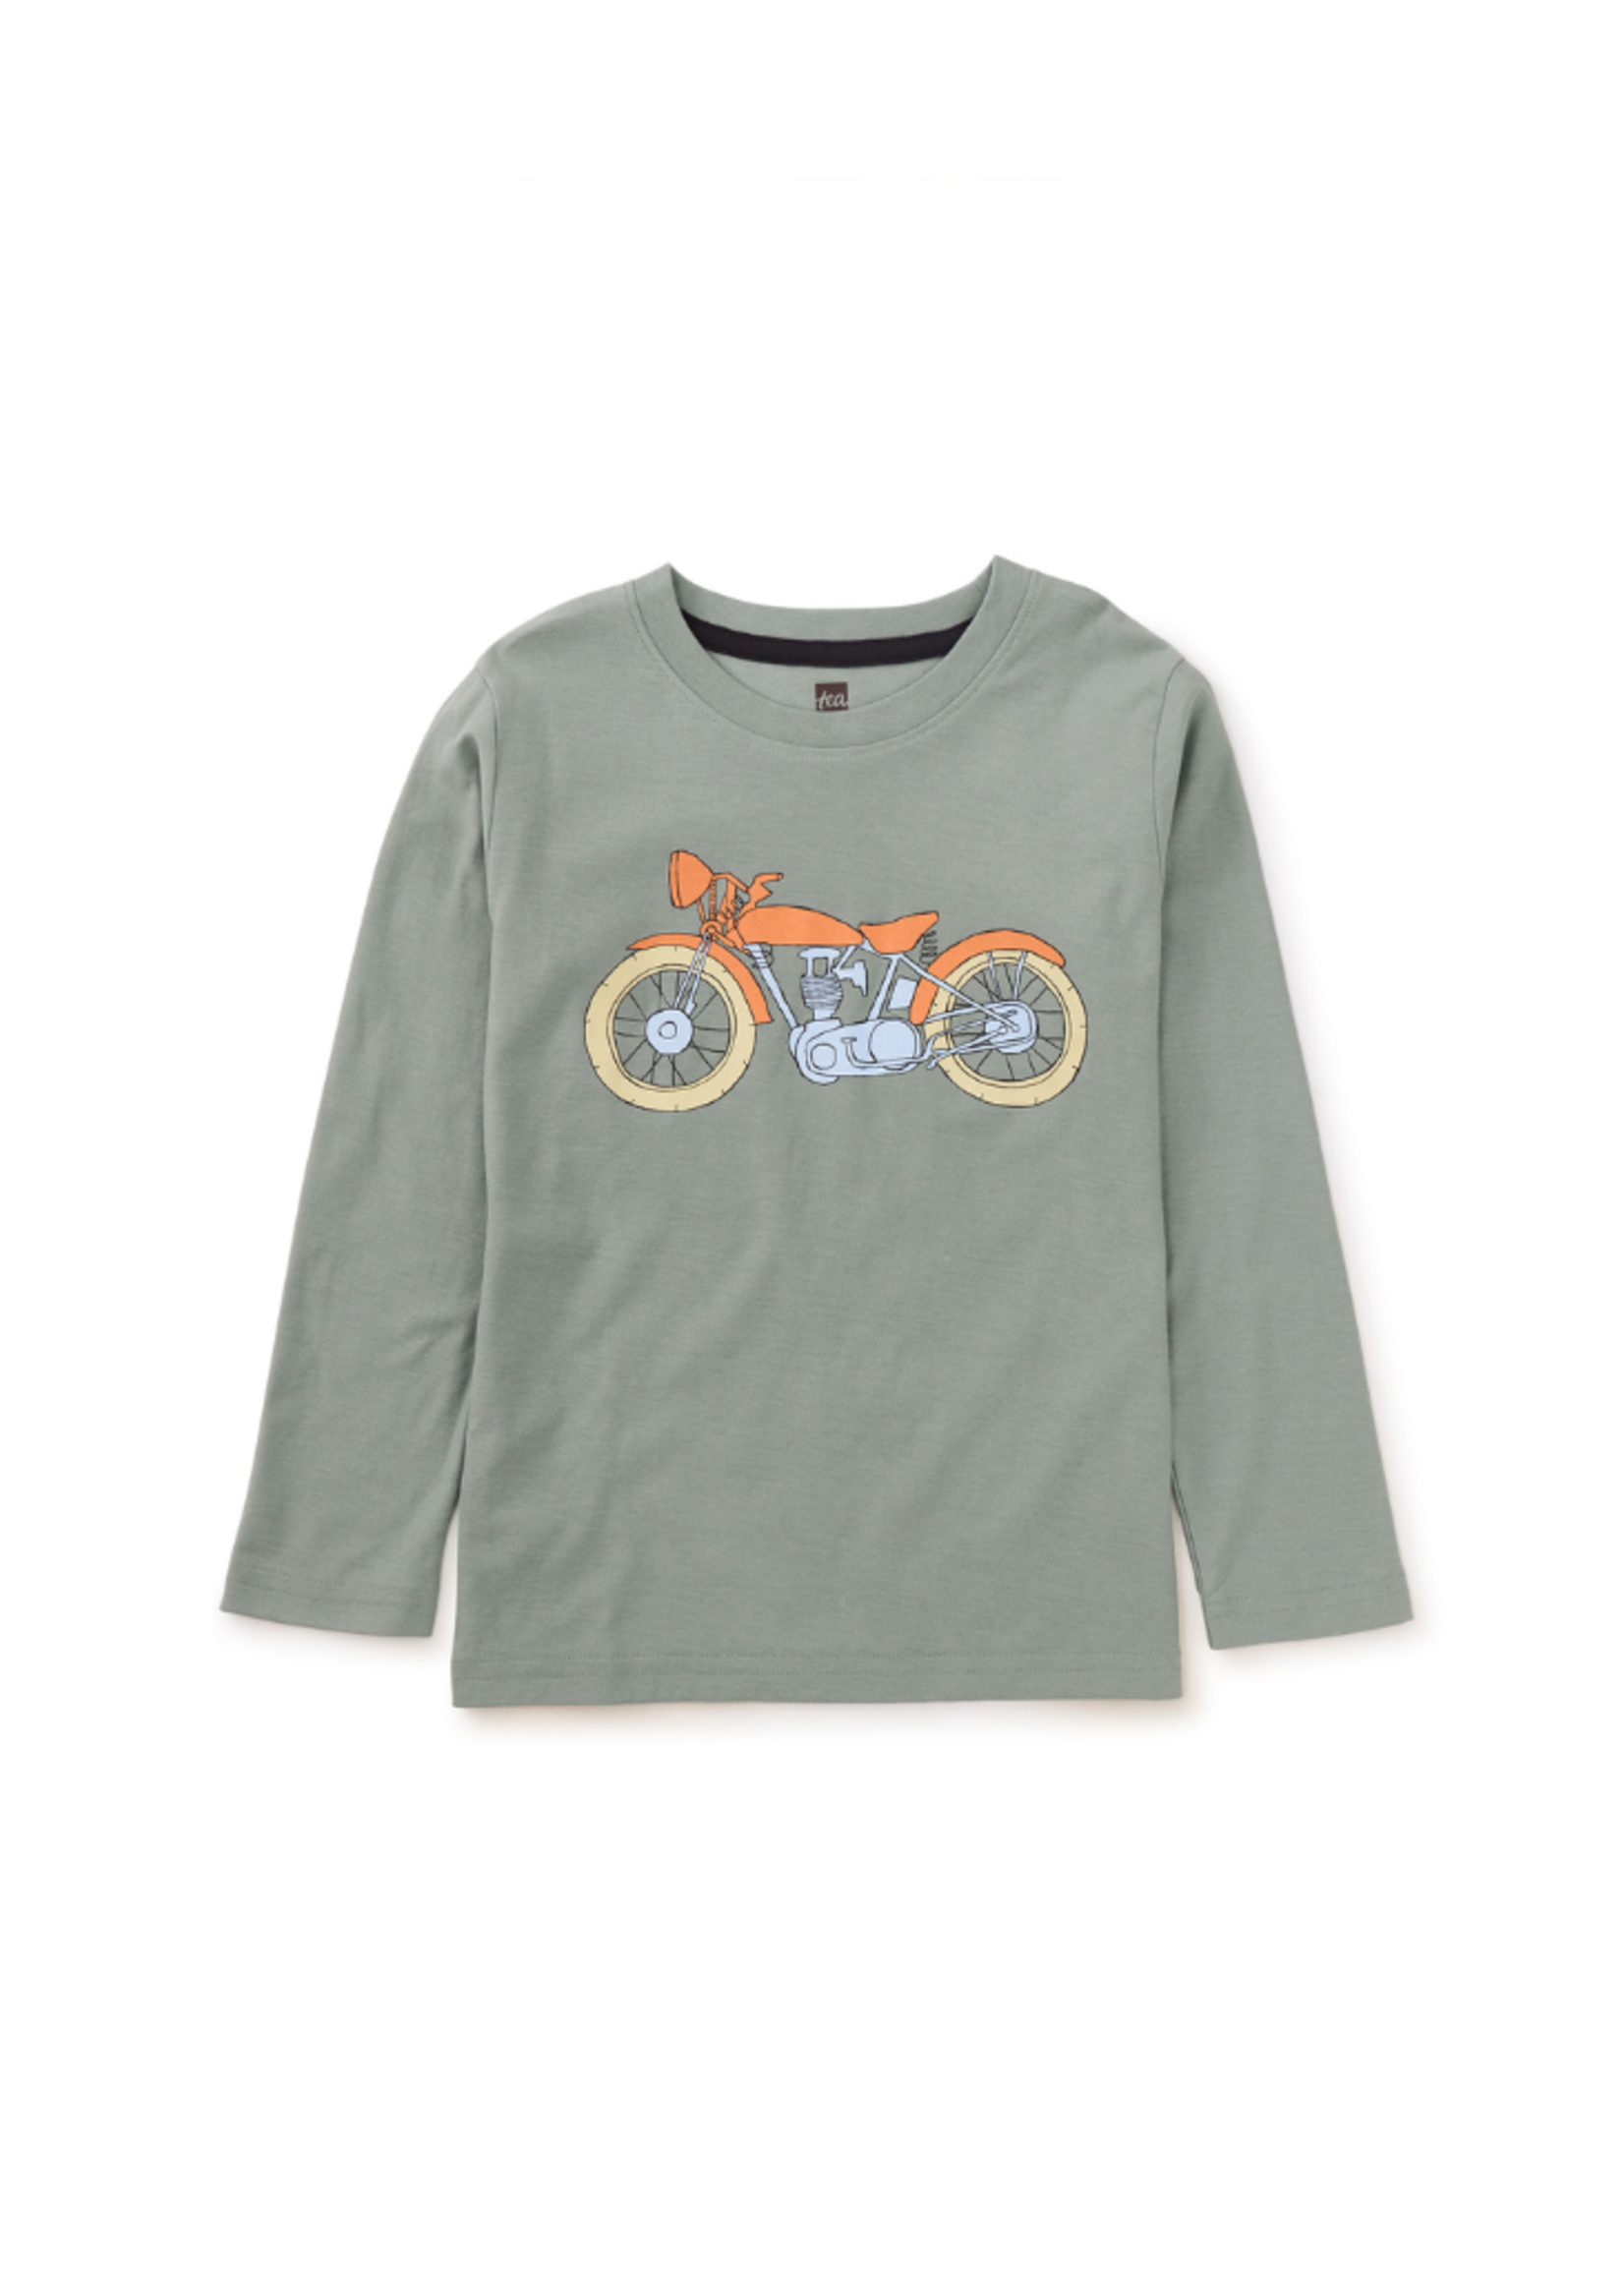 Tea Collection Motorcycle Diaries Graphic Tee